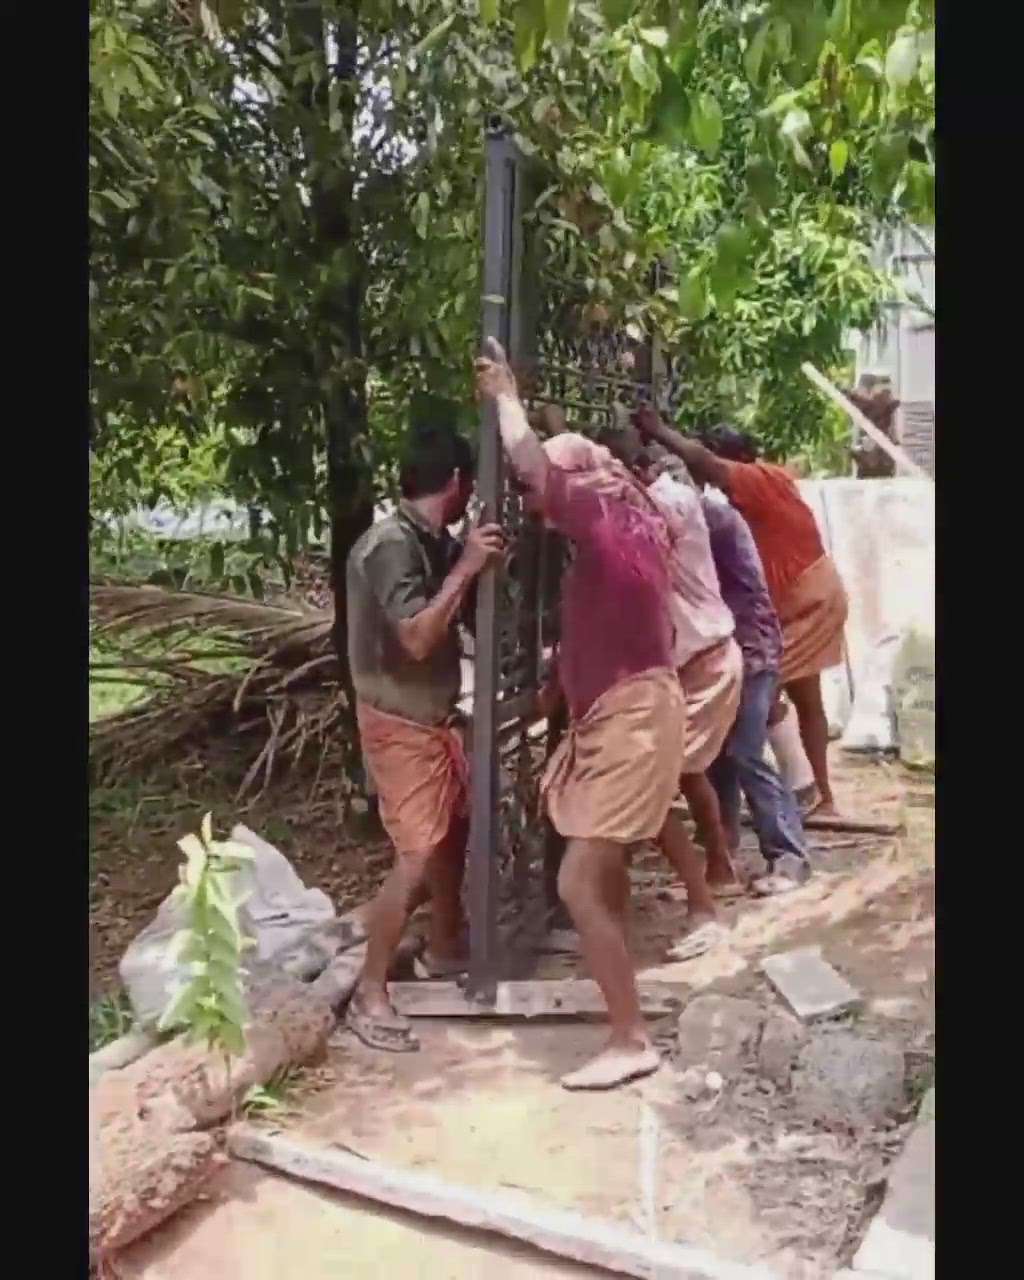 Gate fixing work  at kombidy site.
Takecare construction 
Engineer&Contractors #Contractor  #HouseConstruction #compoundwall #HouseDesigns #homesweethome #himedesign  #cotractors #Thrissur #buildersinkerala